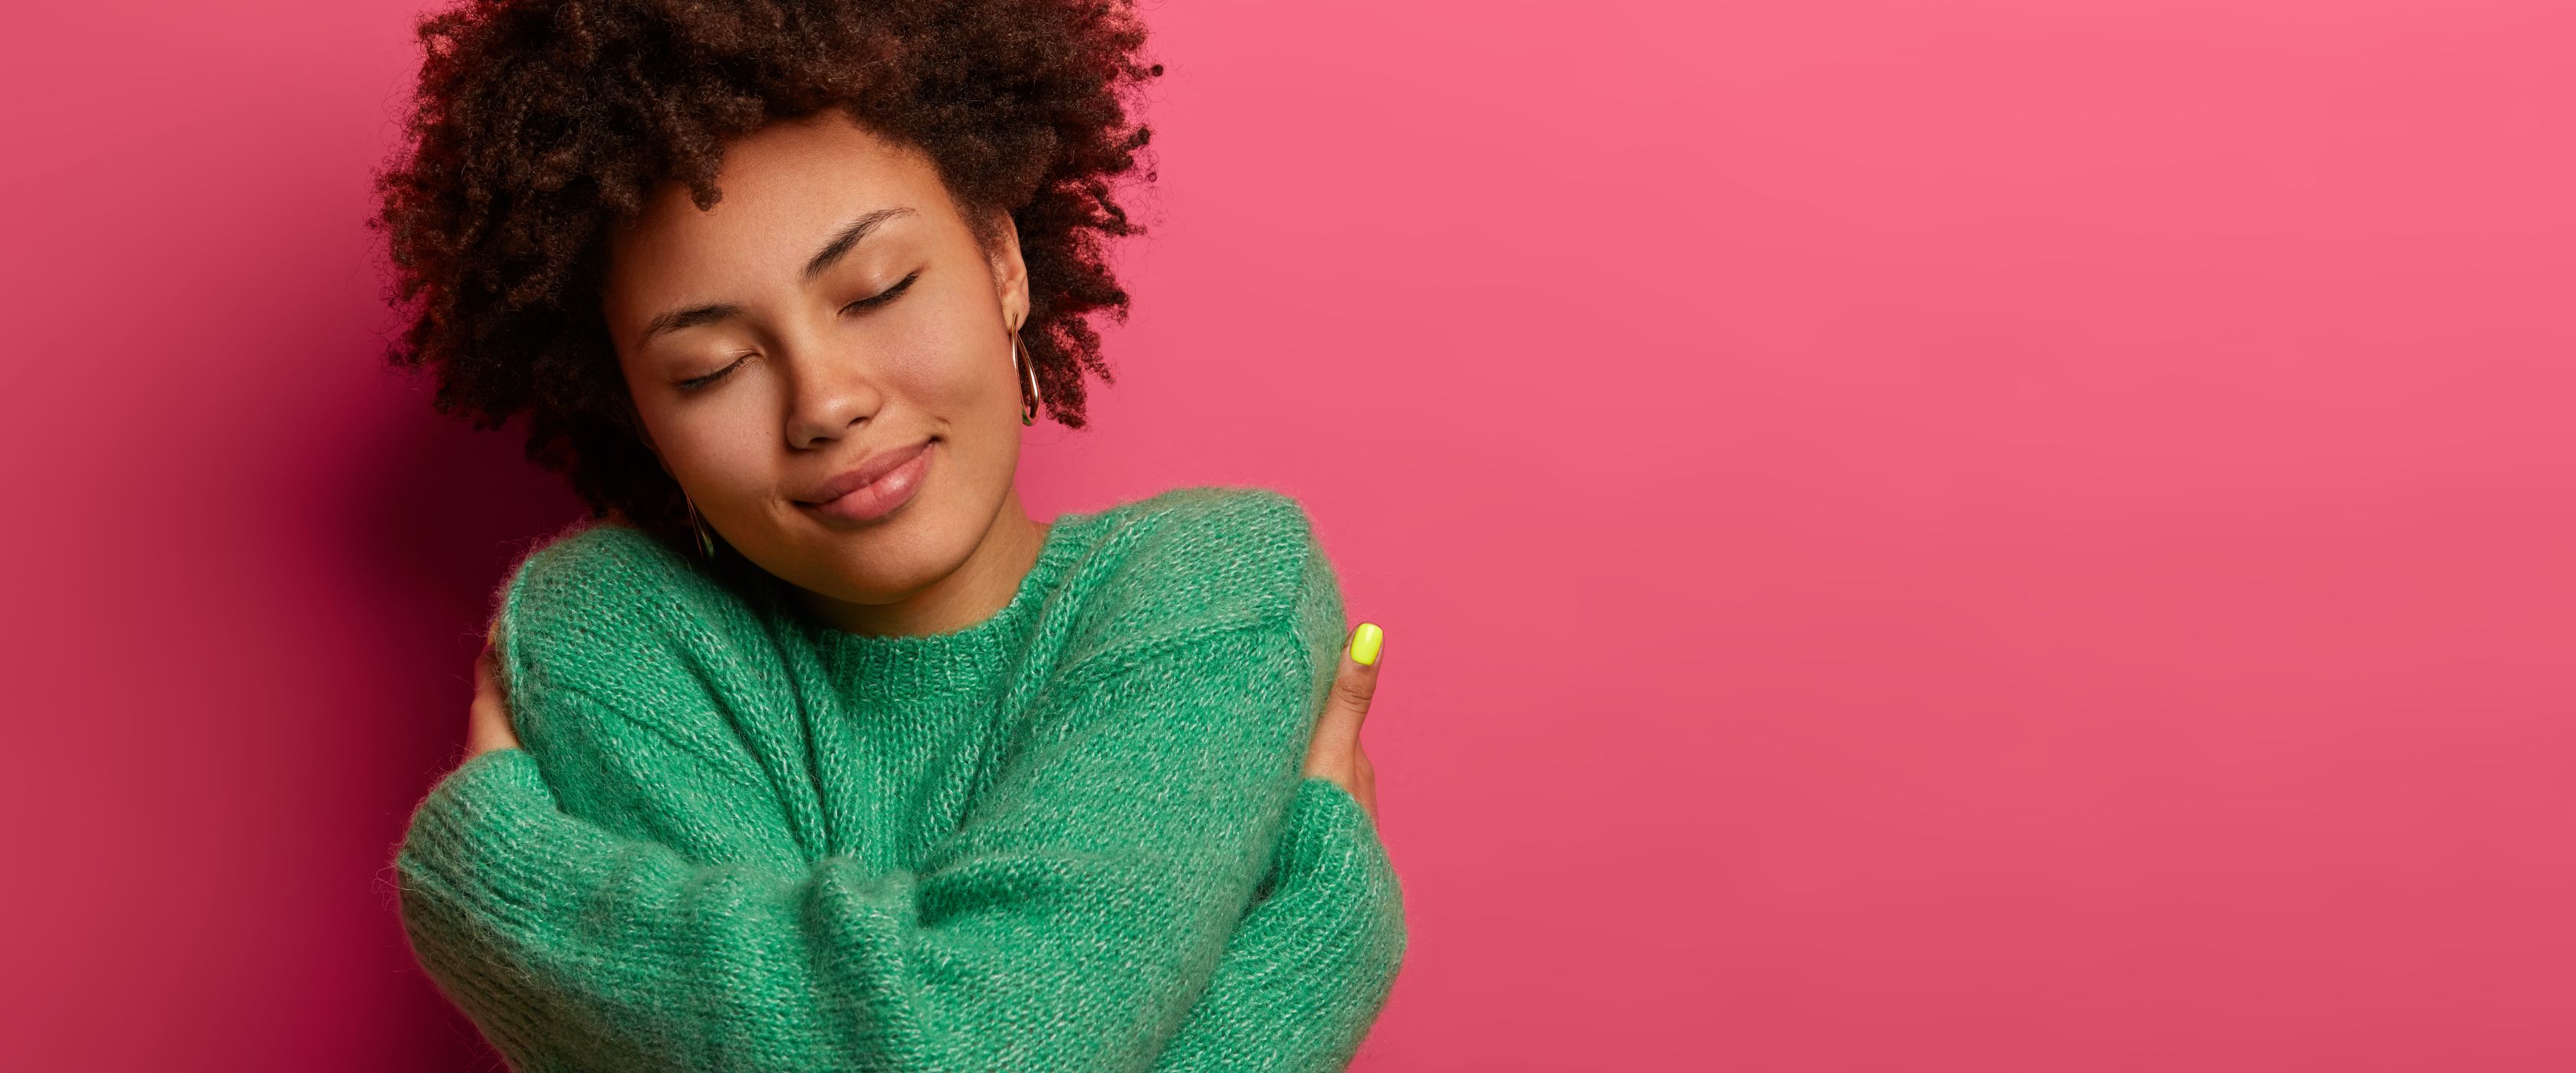 Women in a green sweater hugging herself in front of a pink background